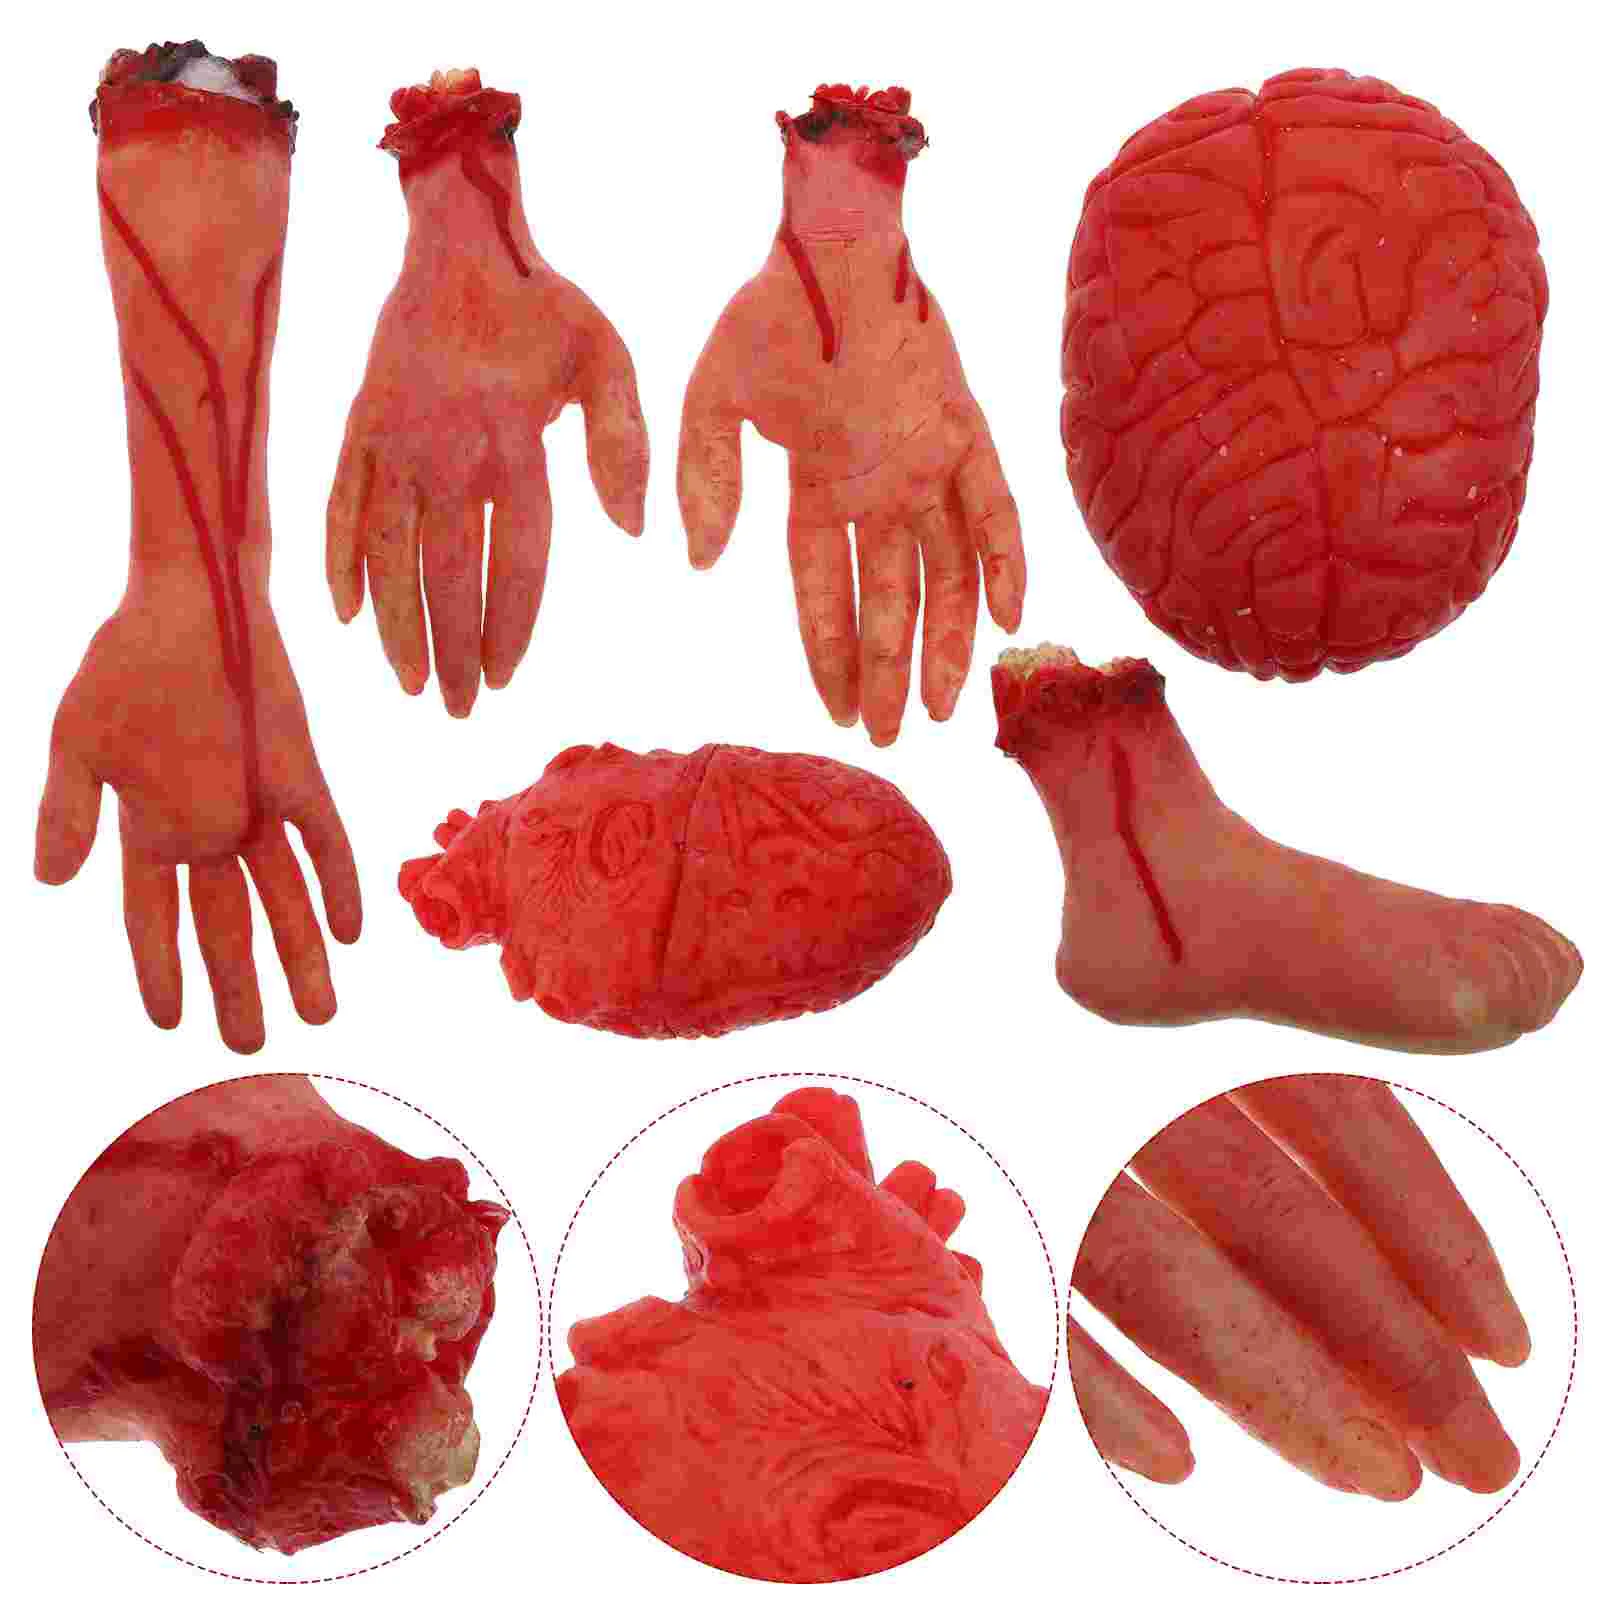 

Bloody Body Parts Hand Decorations Fake Props Prop Scary Human House Broken Haunted Severed Hands Zombiebones Arm Decoration